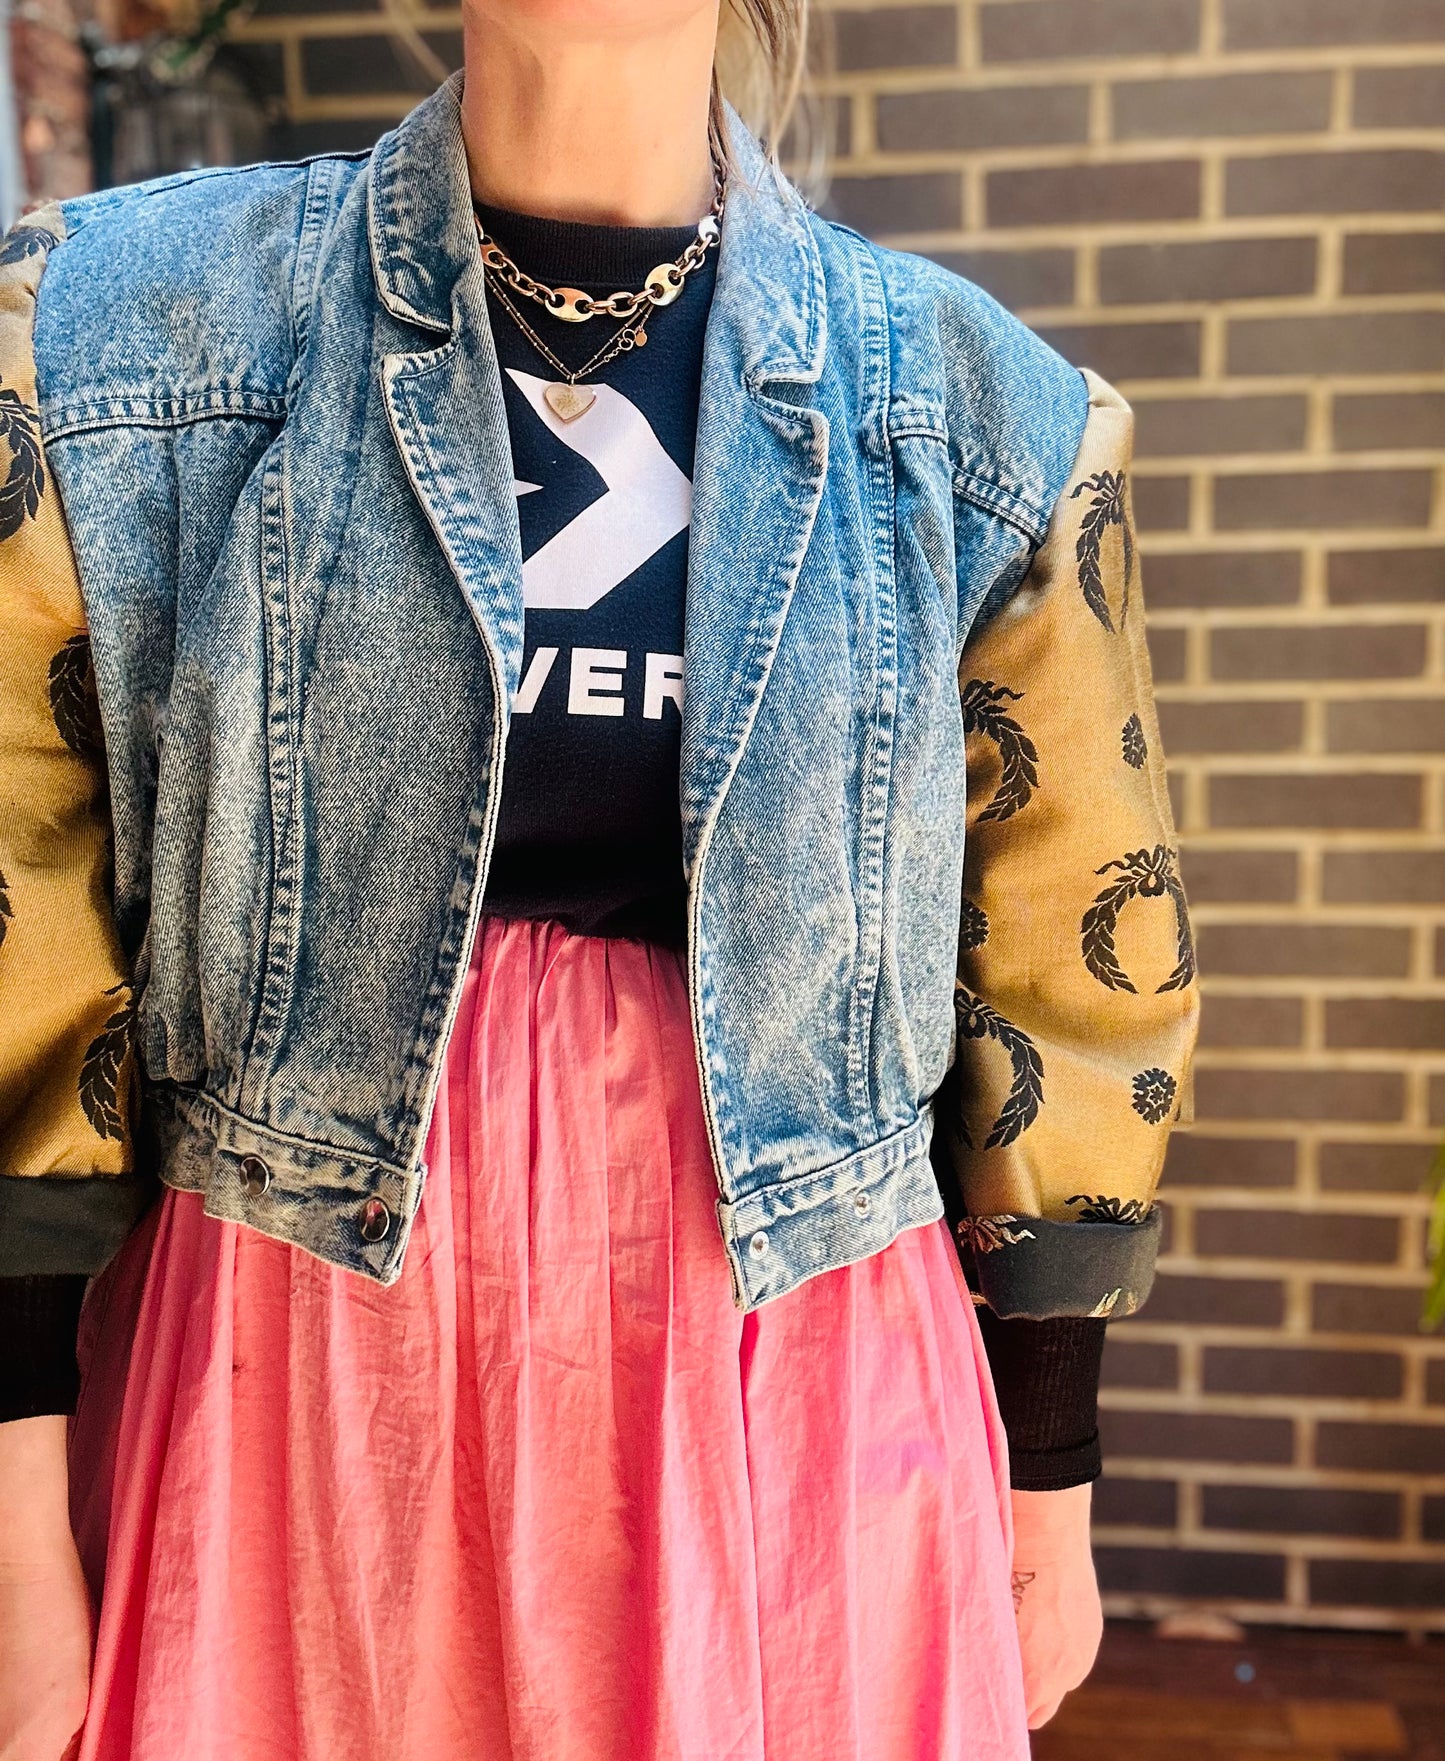 MY collection: Denim repurposed jacket with gold and black jaquard sleeves